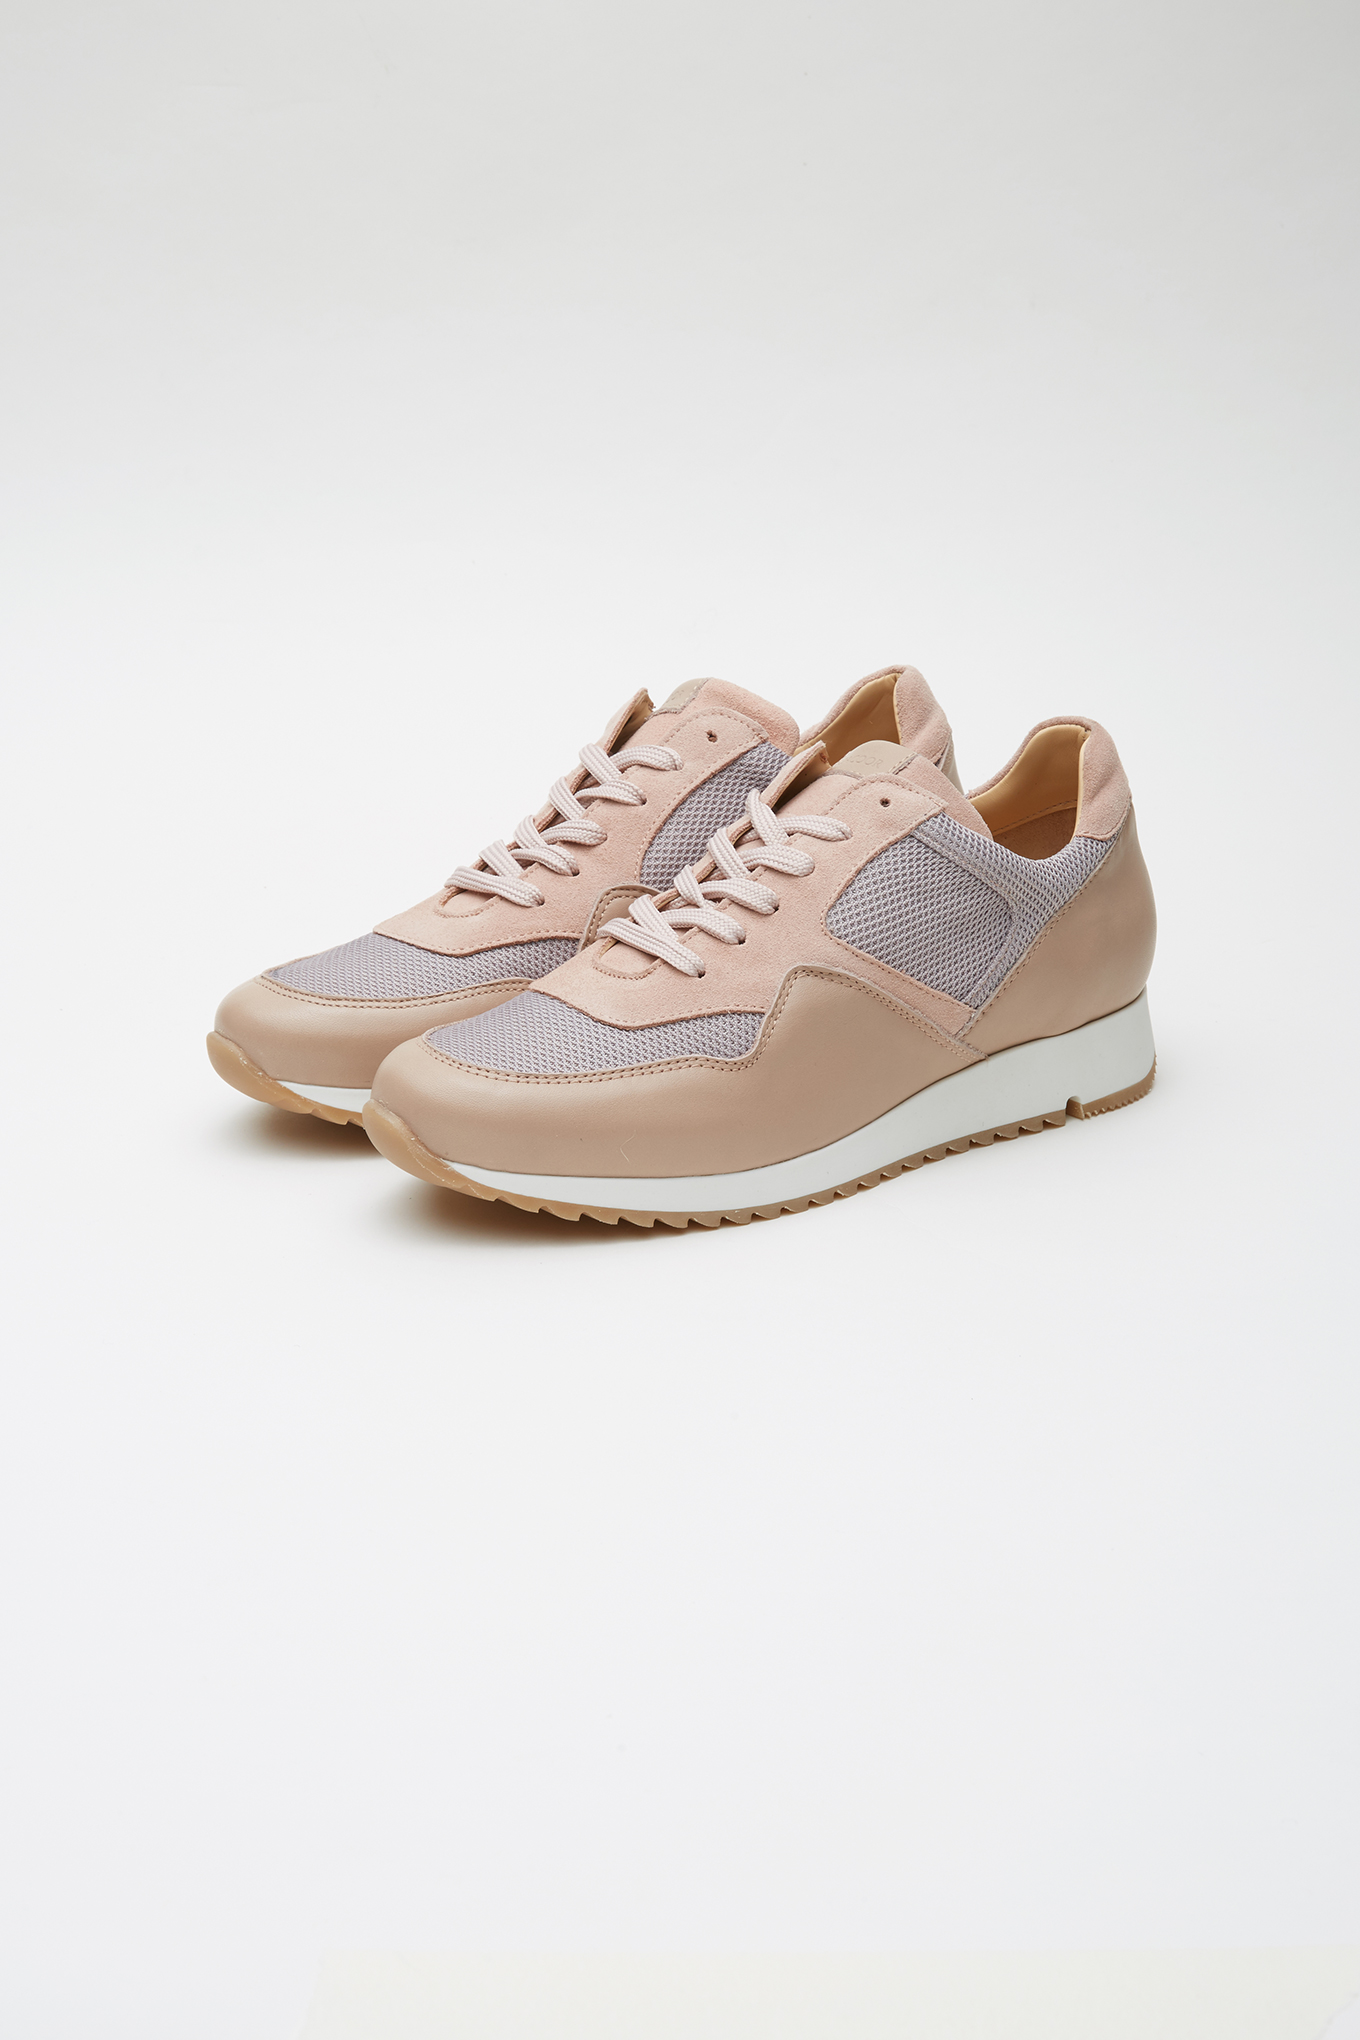 Tennis Pale Pink Casual Woman